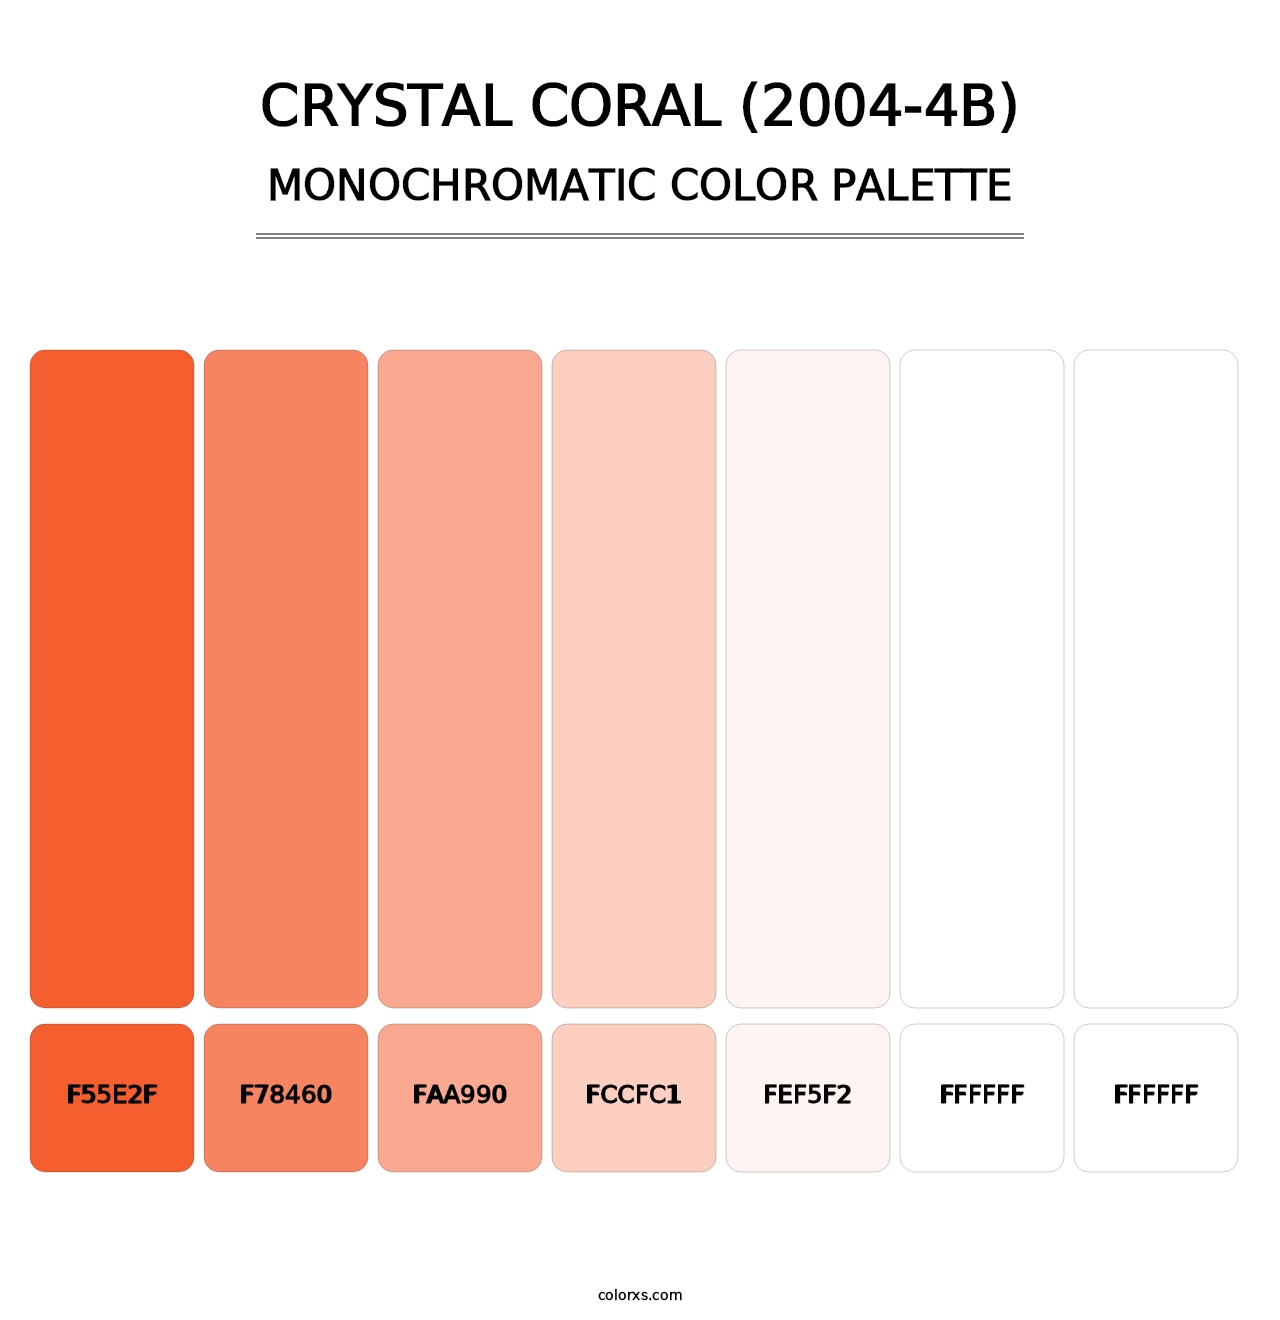 Crystal Coral (2004-4B) - Monochromatic Color Palette